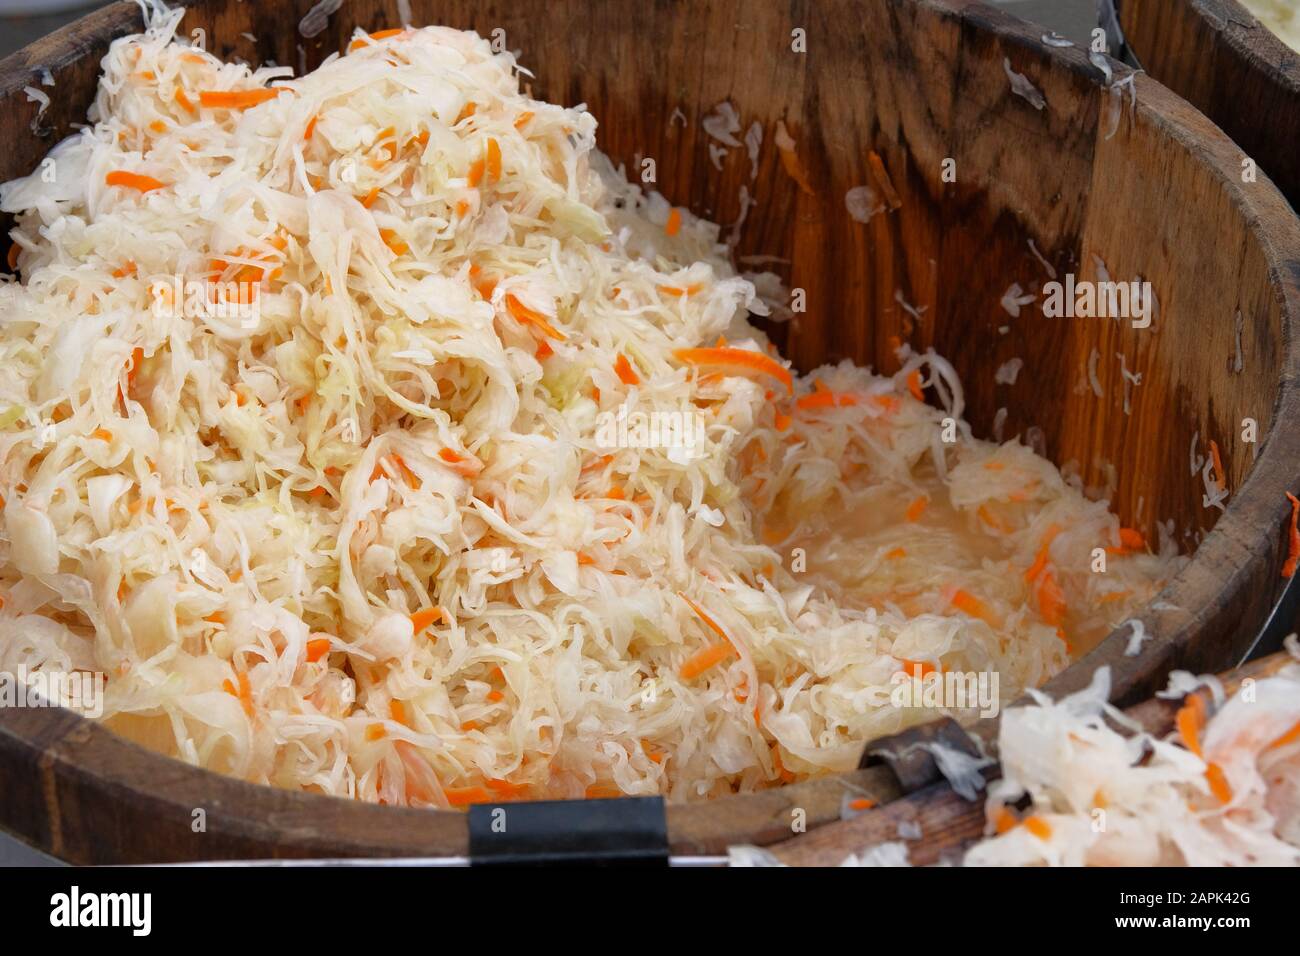 Fermented preserved vegetarian healthy food concept. Sauerkraut with orange carrots in wooden container is sold by weight in local market. Stock Photo